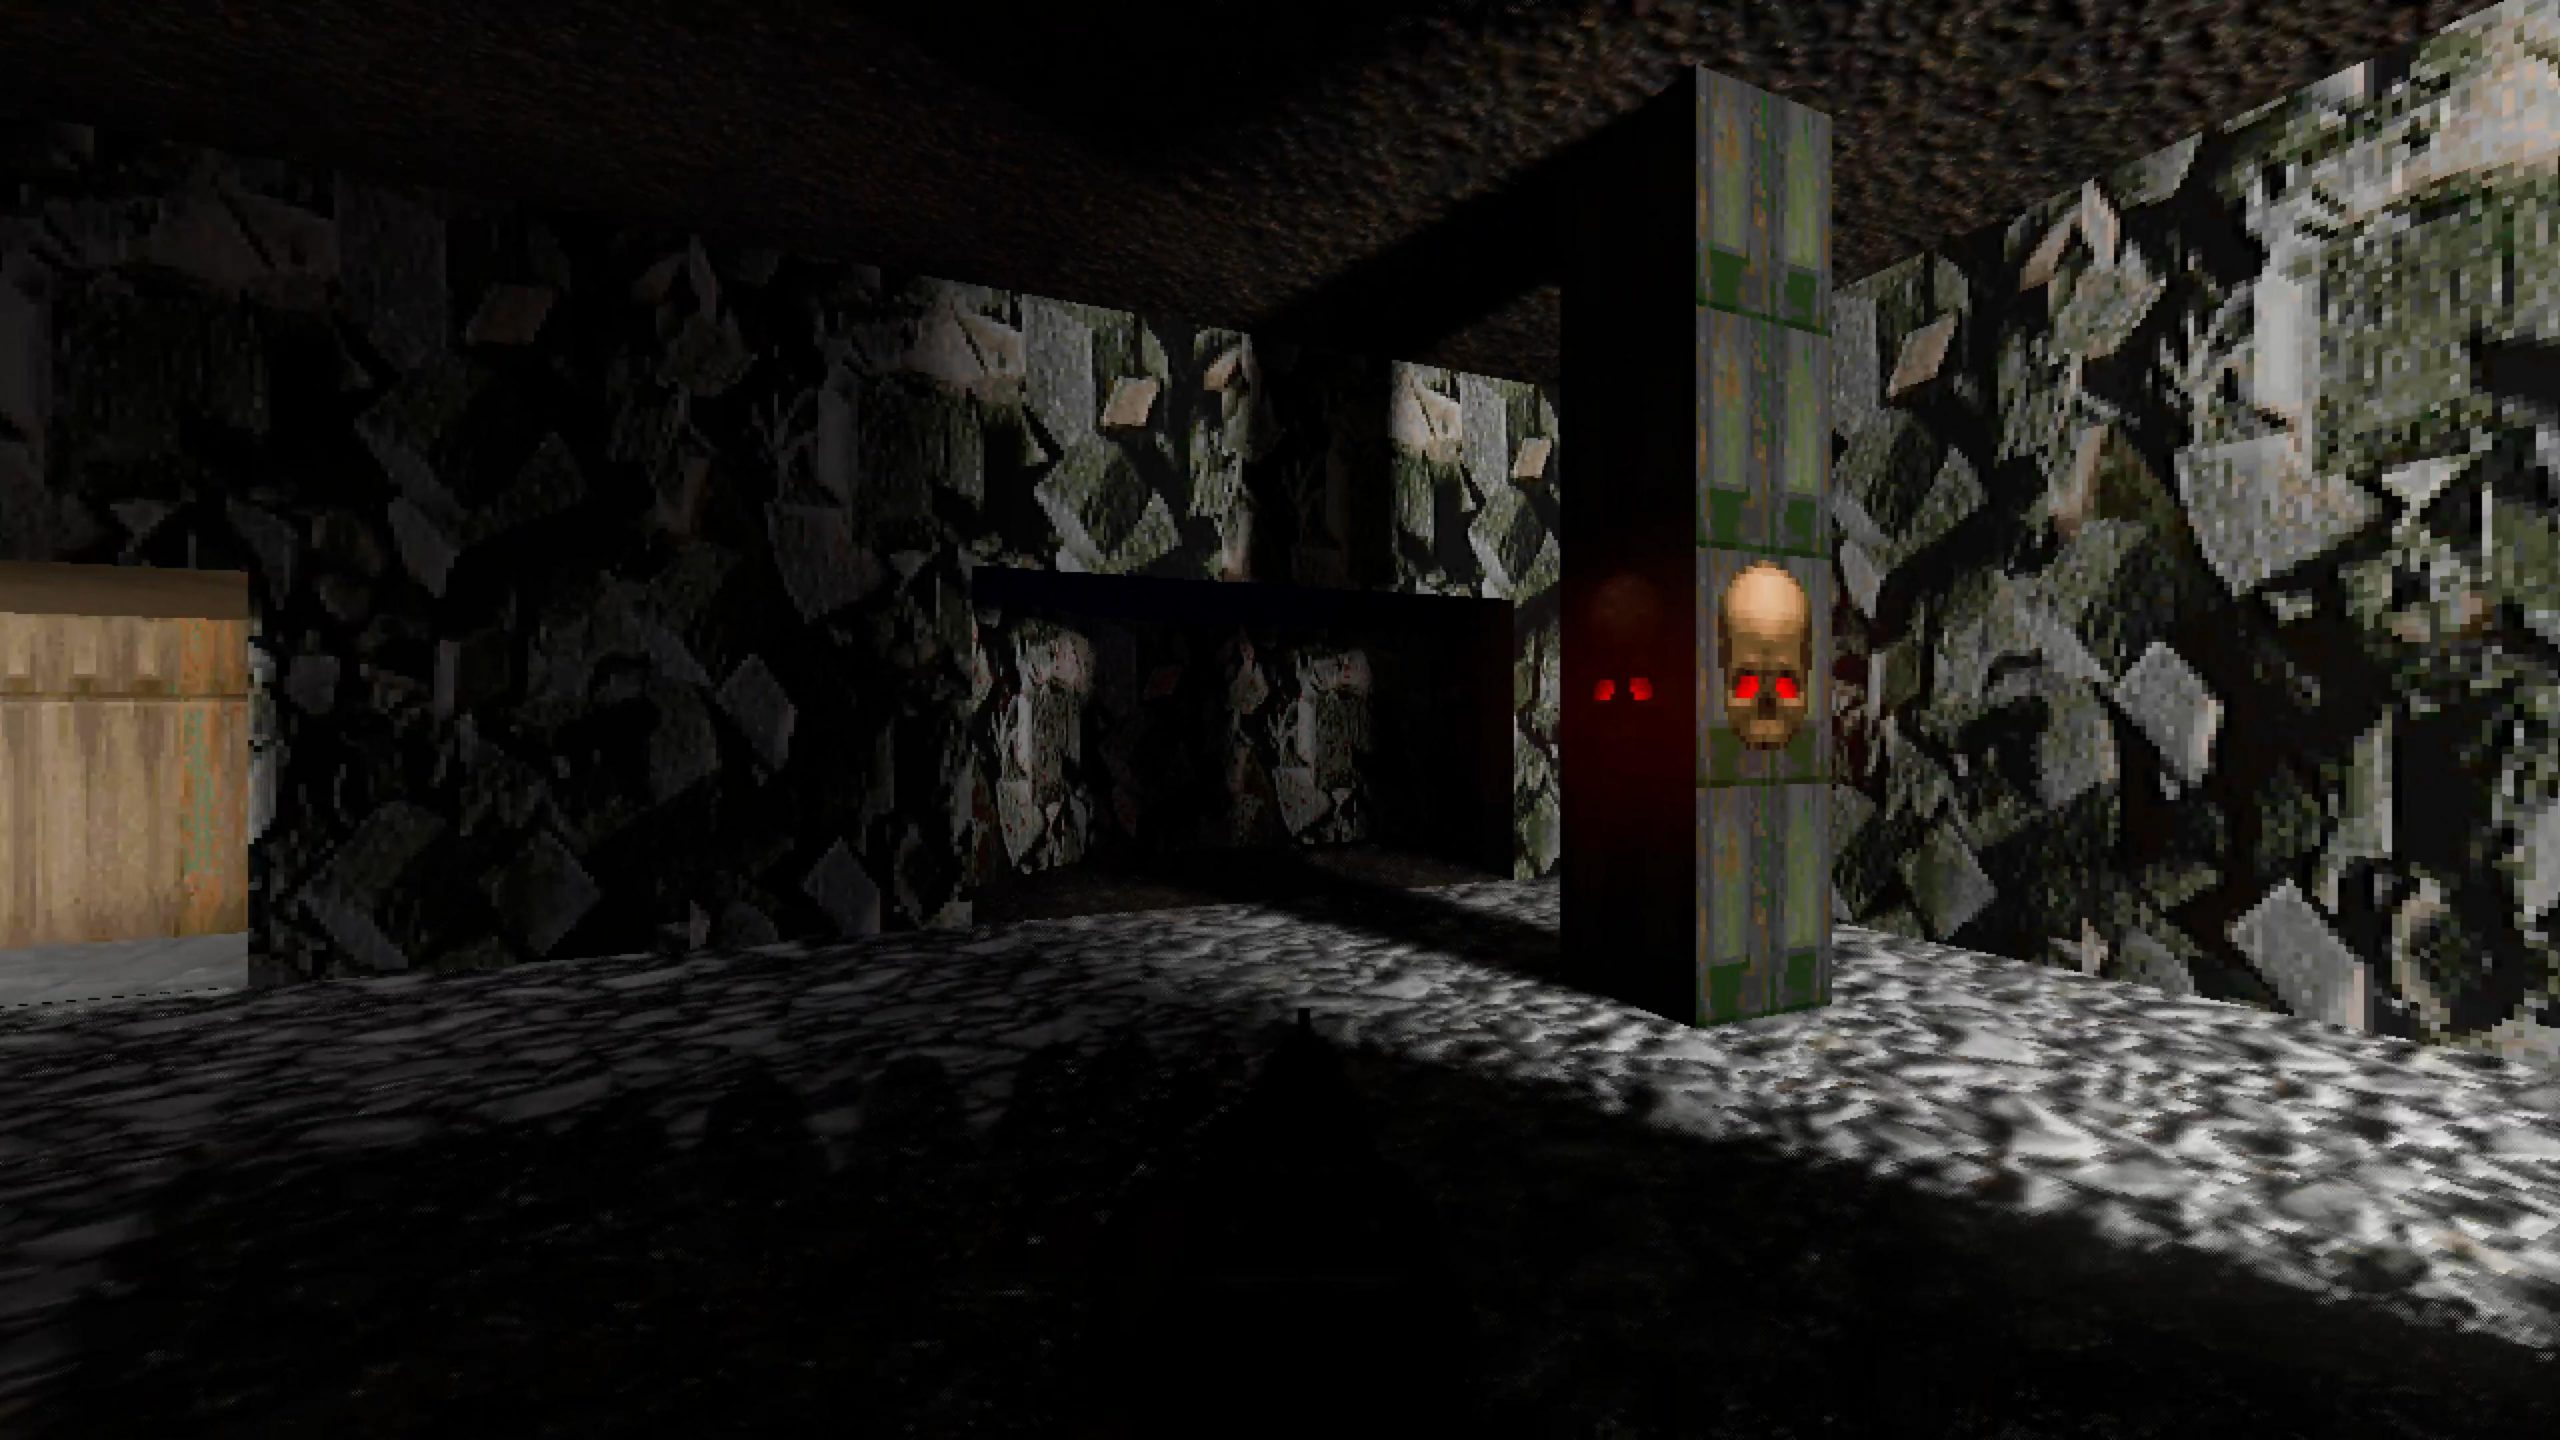 1993 Doom gets ray tracing, for real